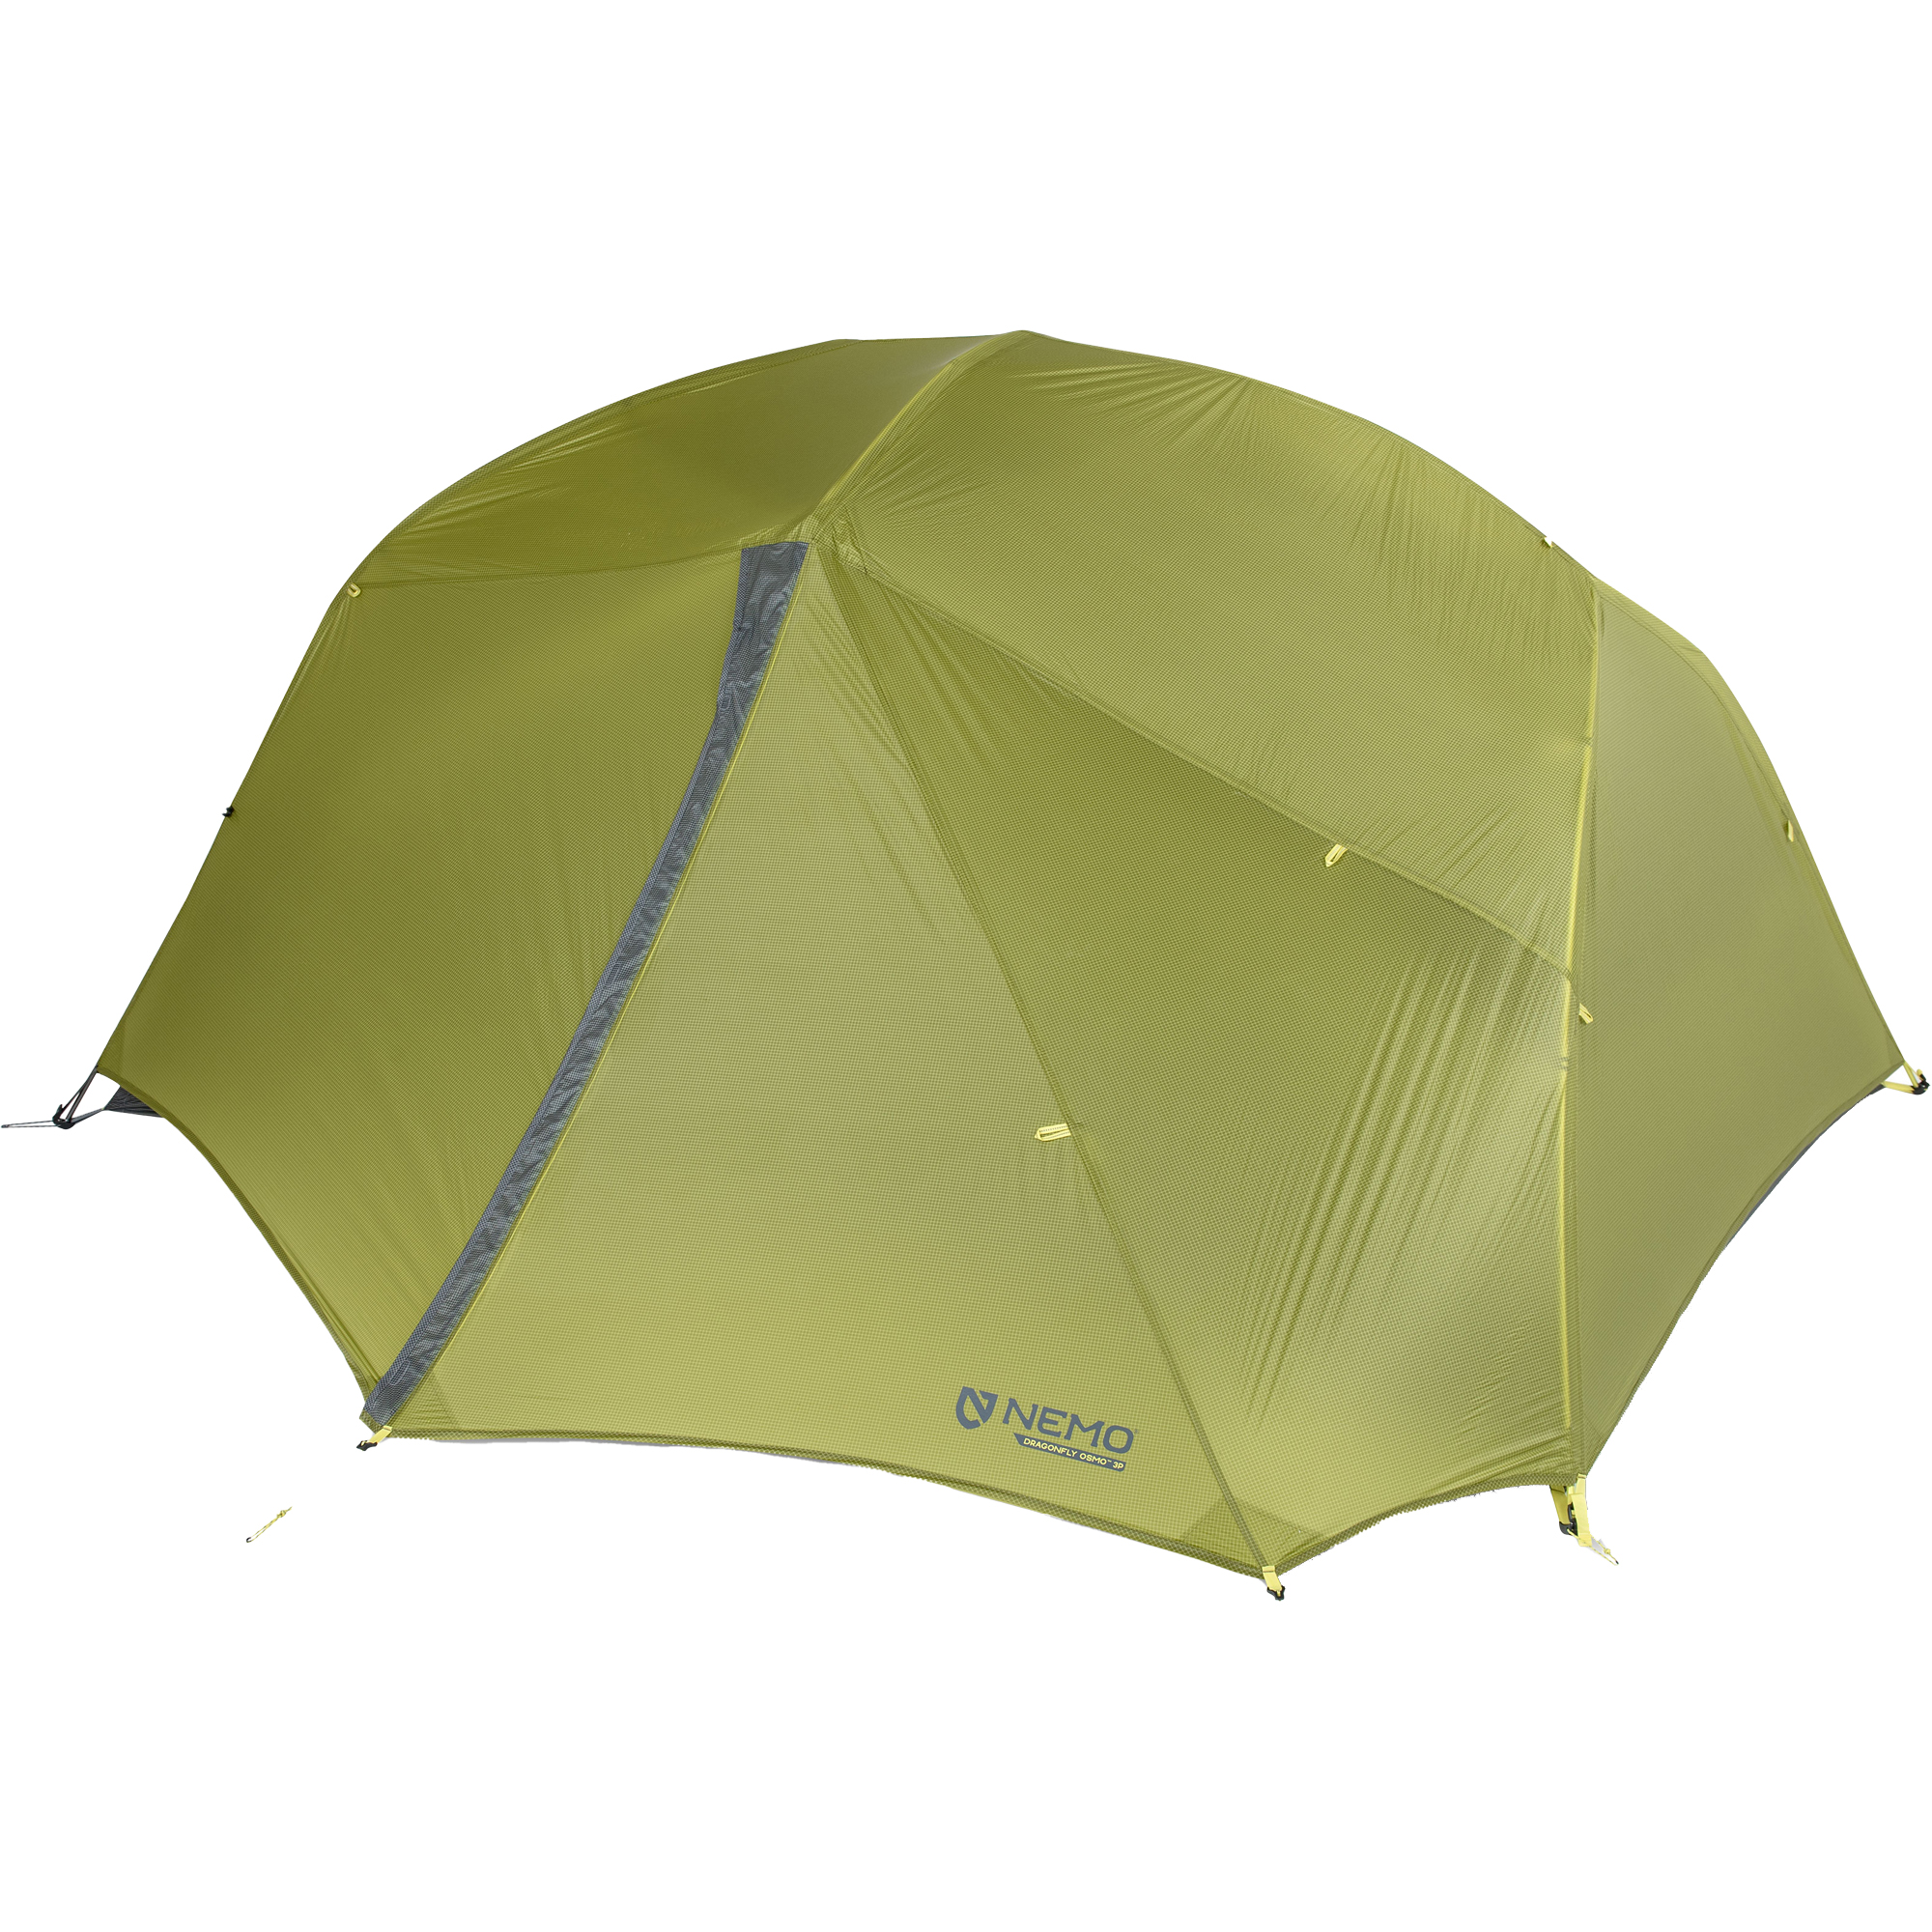 Photos - Tent Nemo Dragonfly OSMO 3 Ultralight Backpacking , 3 Man Birch Bud 